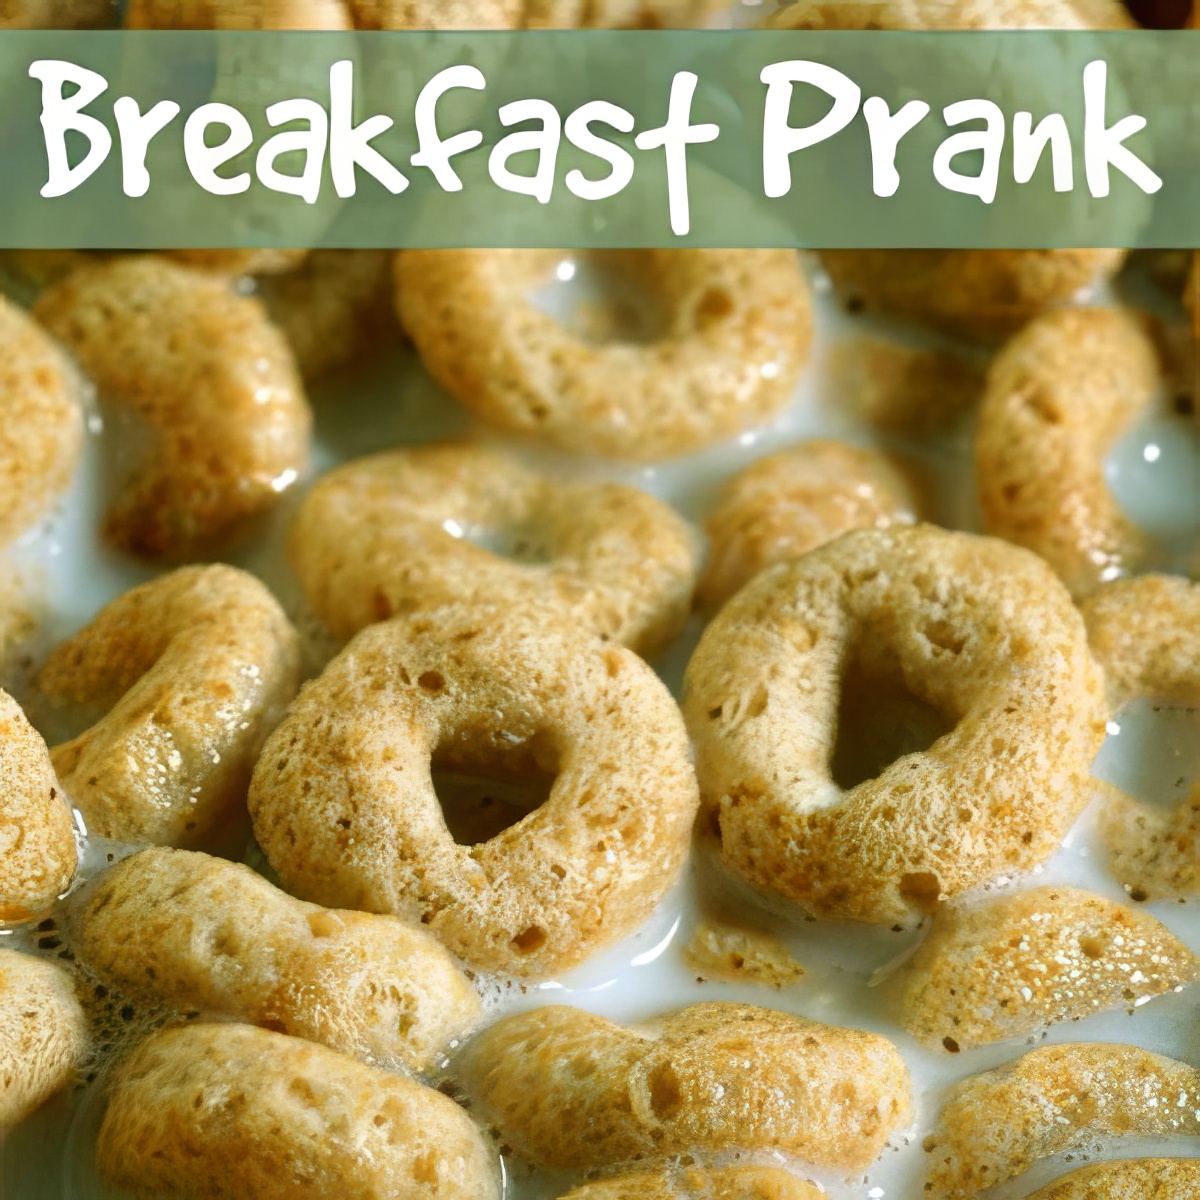 Freeze those cereals to have breakfast prank with your kids this April Fools!